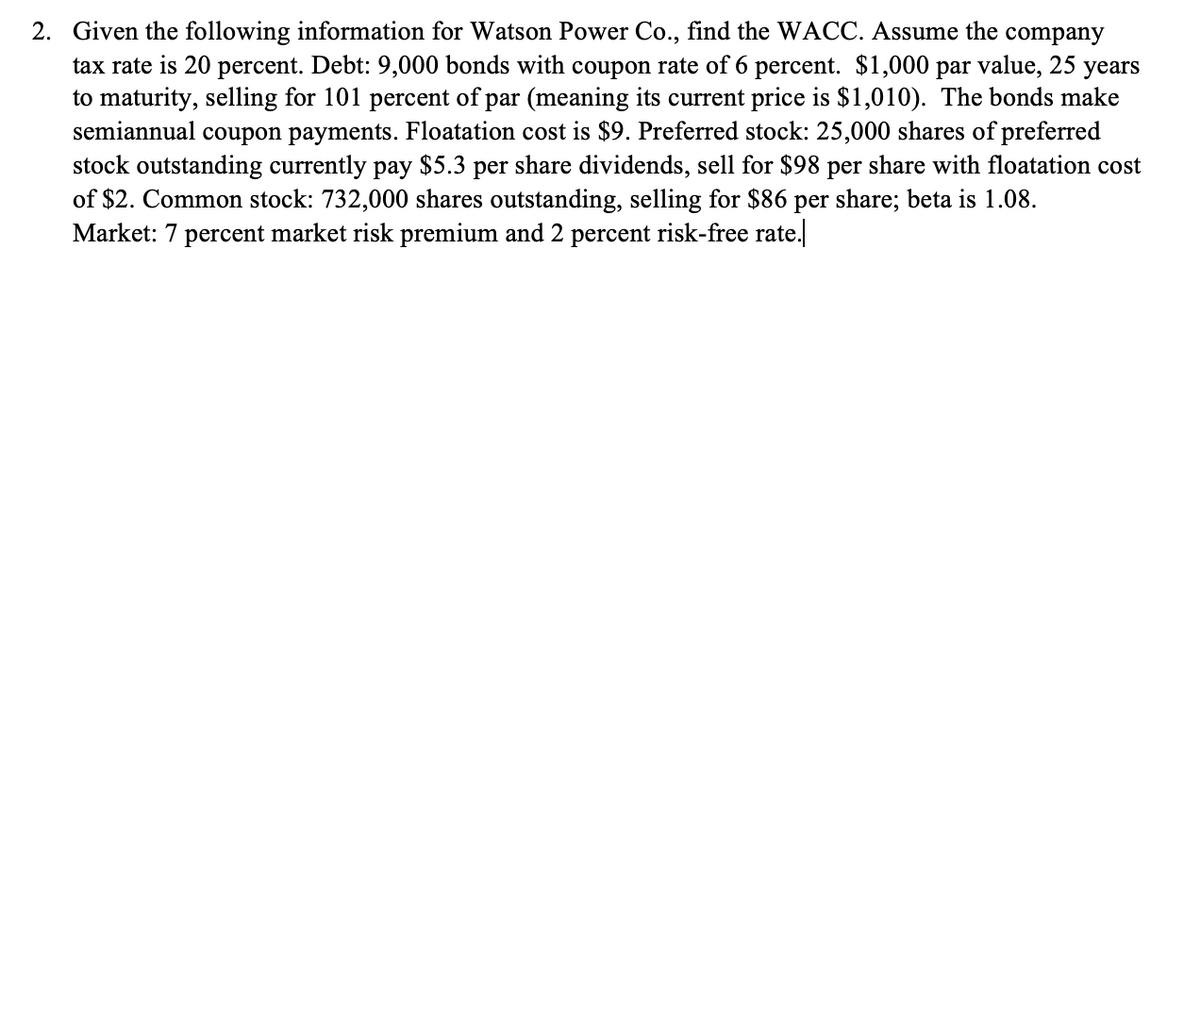 2. Given the following information for Watson Power Co., find the WACC. Assume the company
tax rate is 20 percent. Debt: 9,000 bonds with coupon rate of 6 percent. $1,000 par value, 25 years
to maturity, selling for 101 percent of par (meaning its current price is $1,010). The bonds make
semiannual coupon payments. Floatation cost is $9. Preferred stock: 25,000 shares of preferred
stock outstanding currently pay $5.3 per share dividends, sell for $98 per share with floatation cost
of $2. Common stock: 732,000 shares outstanding, selling for $86 per share; beta is 1.08.
Market: 7 percent market risk premium and 2 percent risk-free rate.
